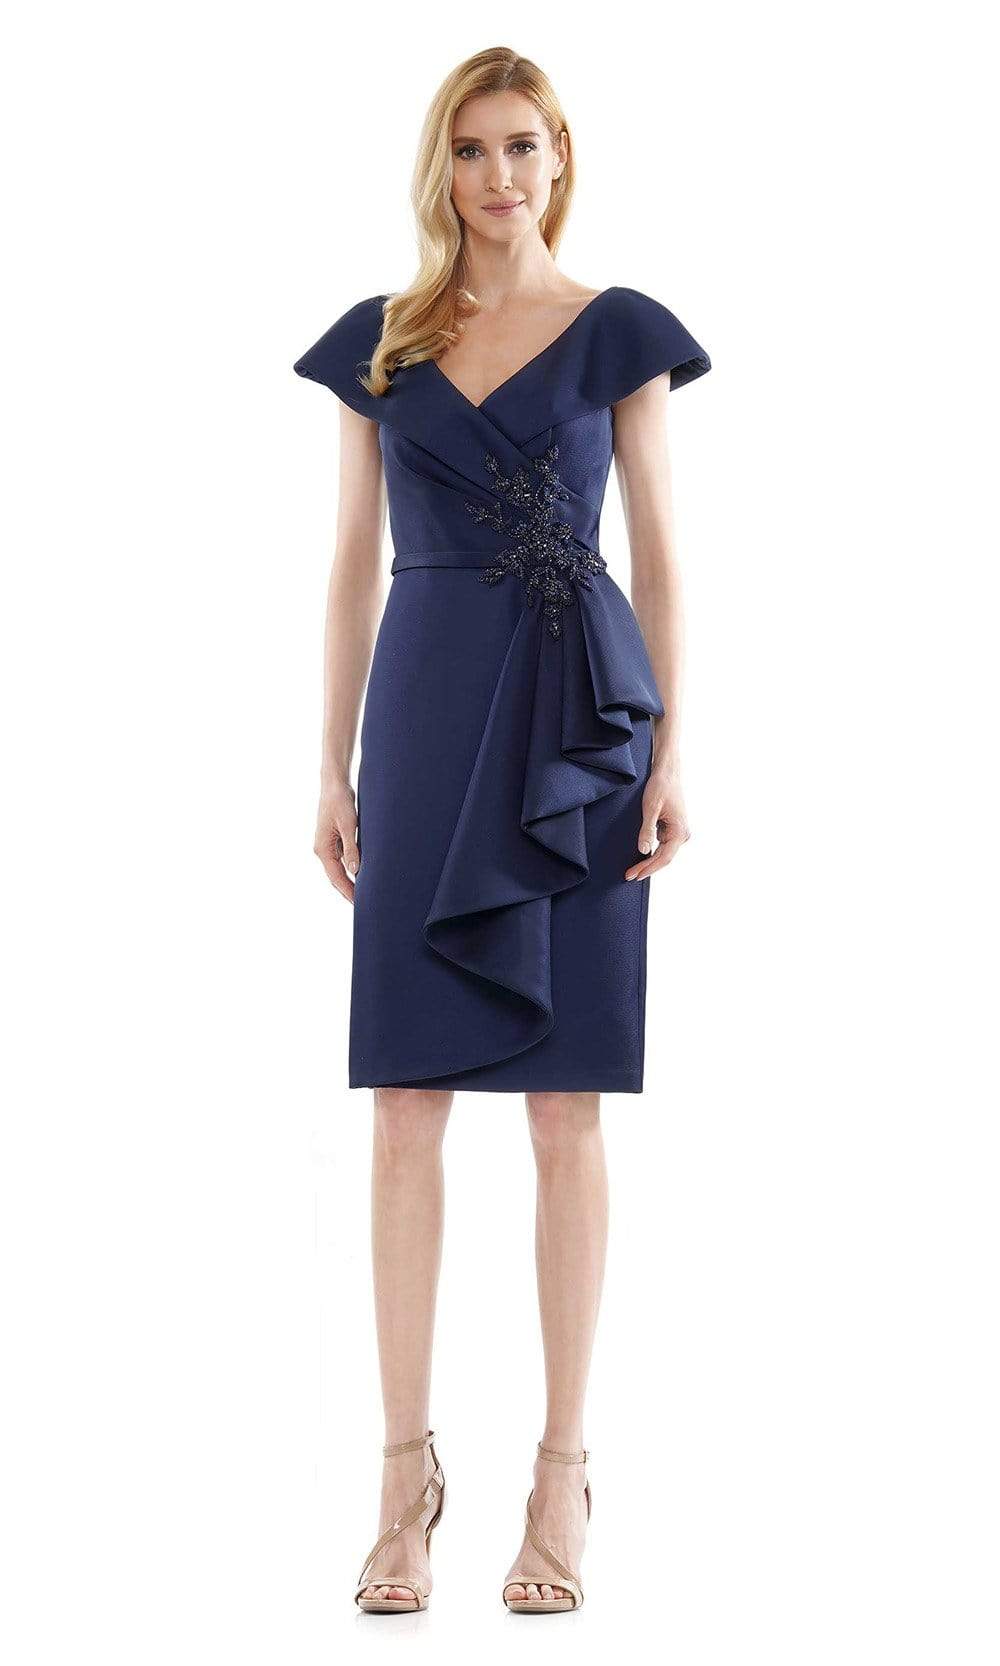 Marsoni by Colors - MV1106 Knee Length Ruffle Trimmed Sheath Dress Mother of the Bride Dresses 4 / Navy